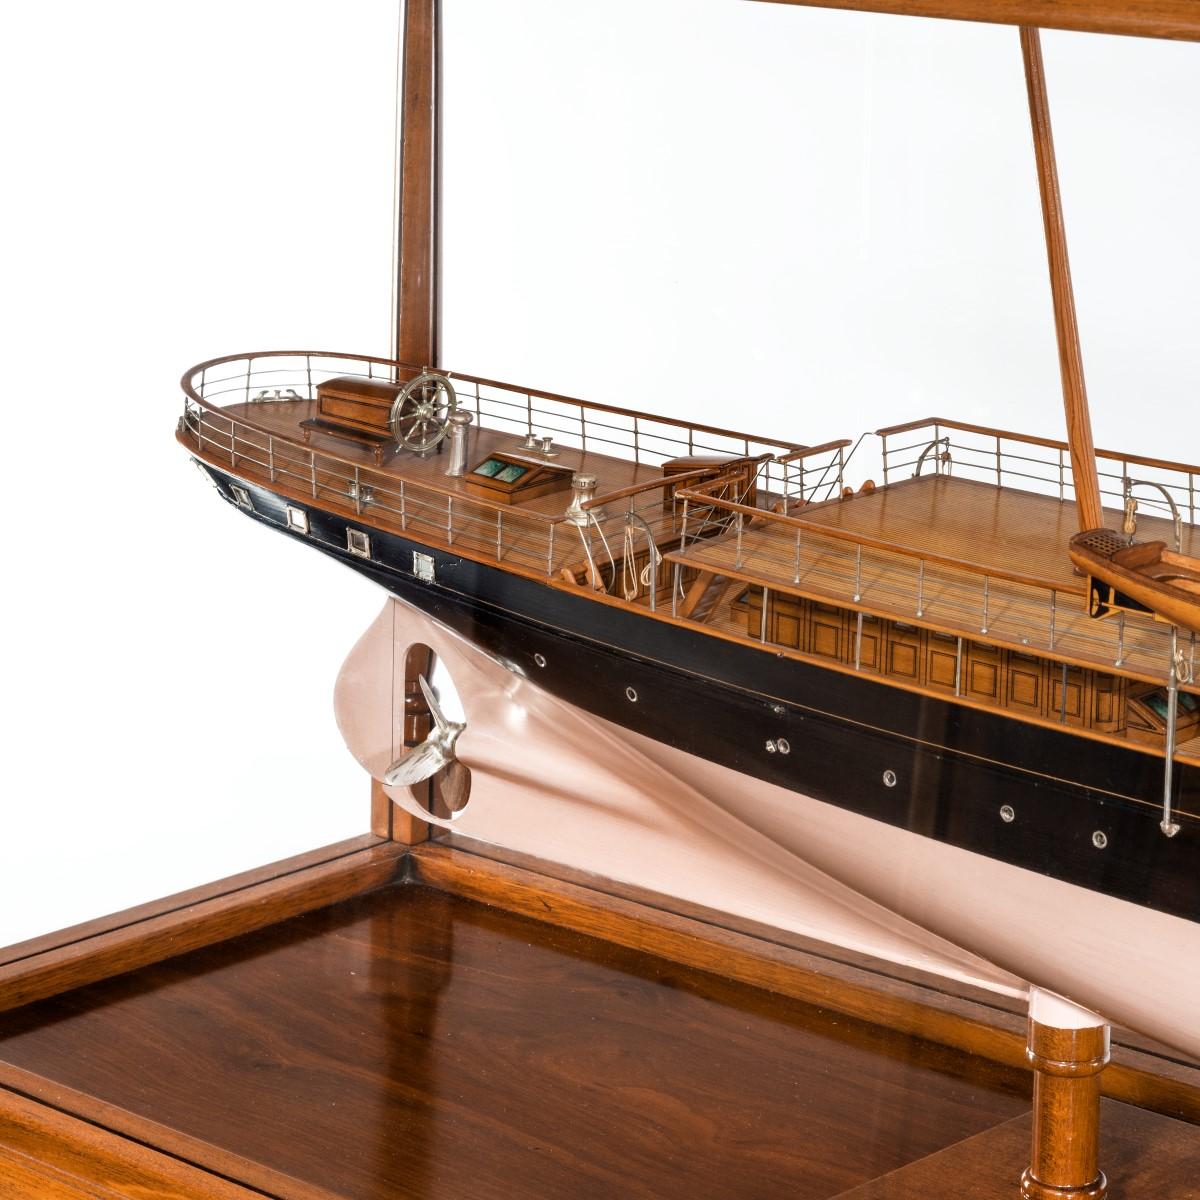 The Marquess of Conyngham’s yacht Helen